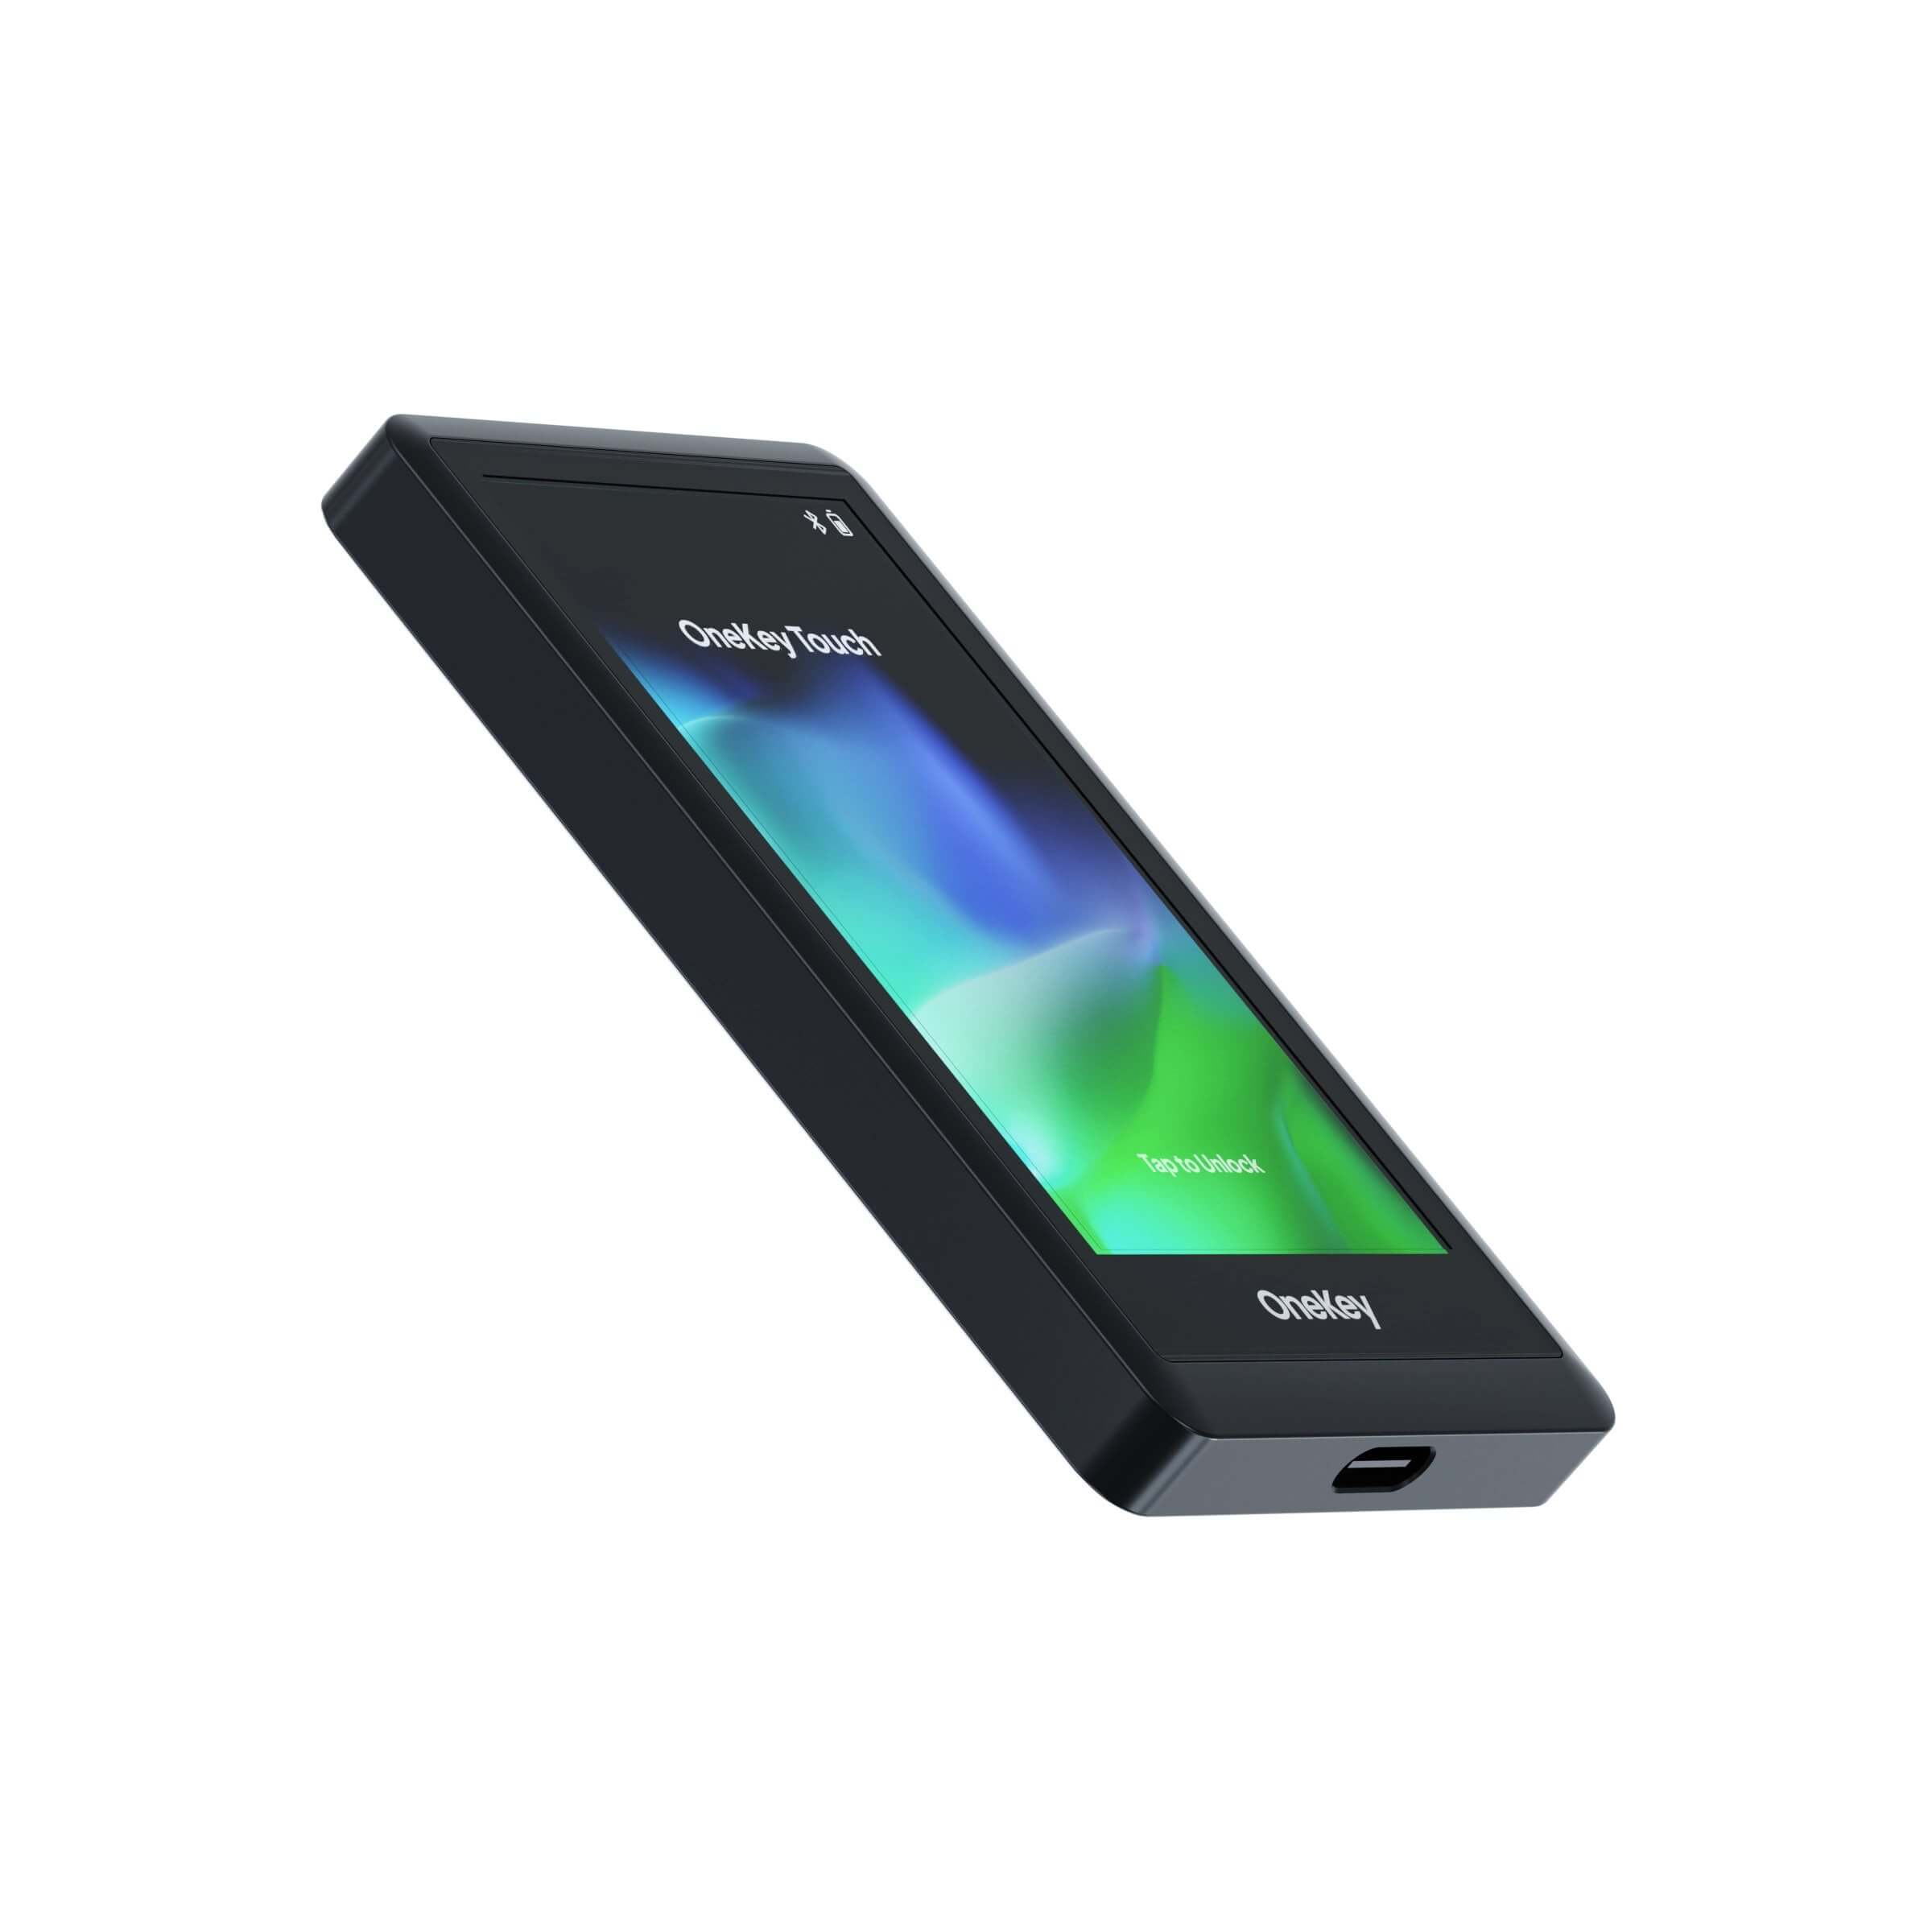 Angled view of the OneKey Touch touchscreen crypto hardware wallet, showing the bottom charging port, with the screen displaying a green background and 'tap to unlock' text.